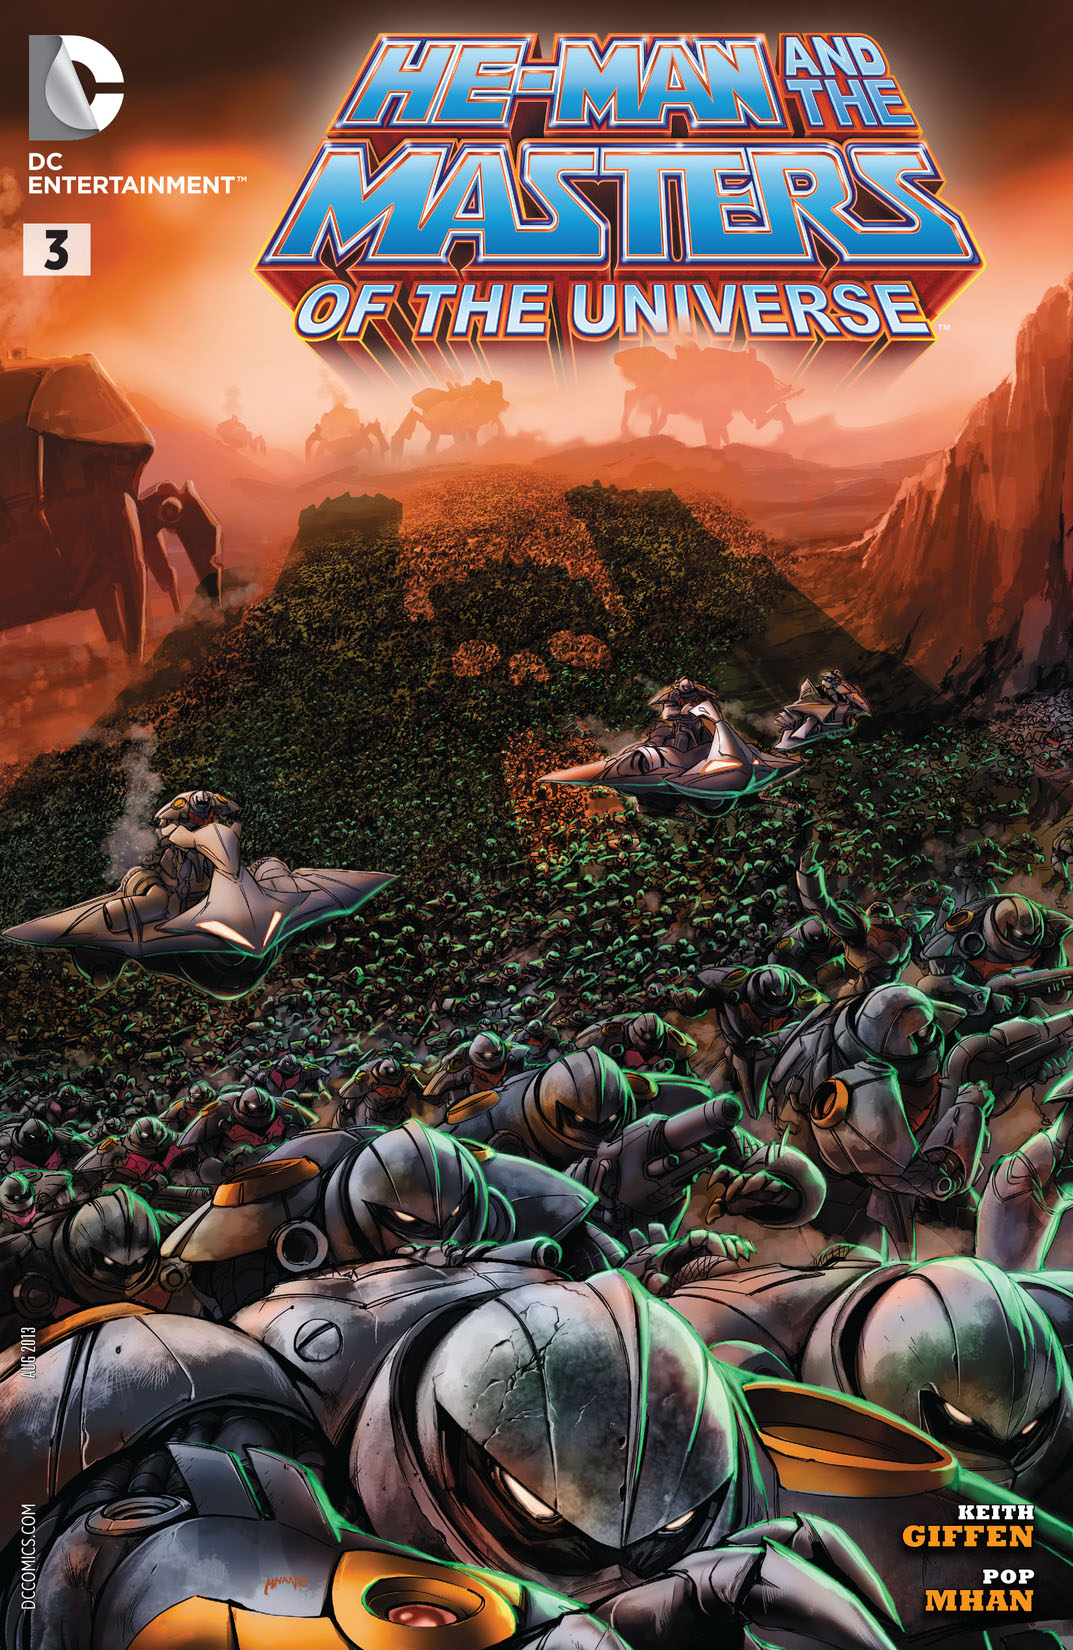 He-Man and the Masters of the Universe (2013-) #3 preview images